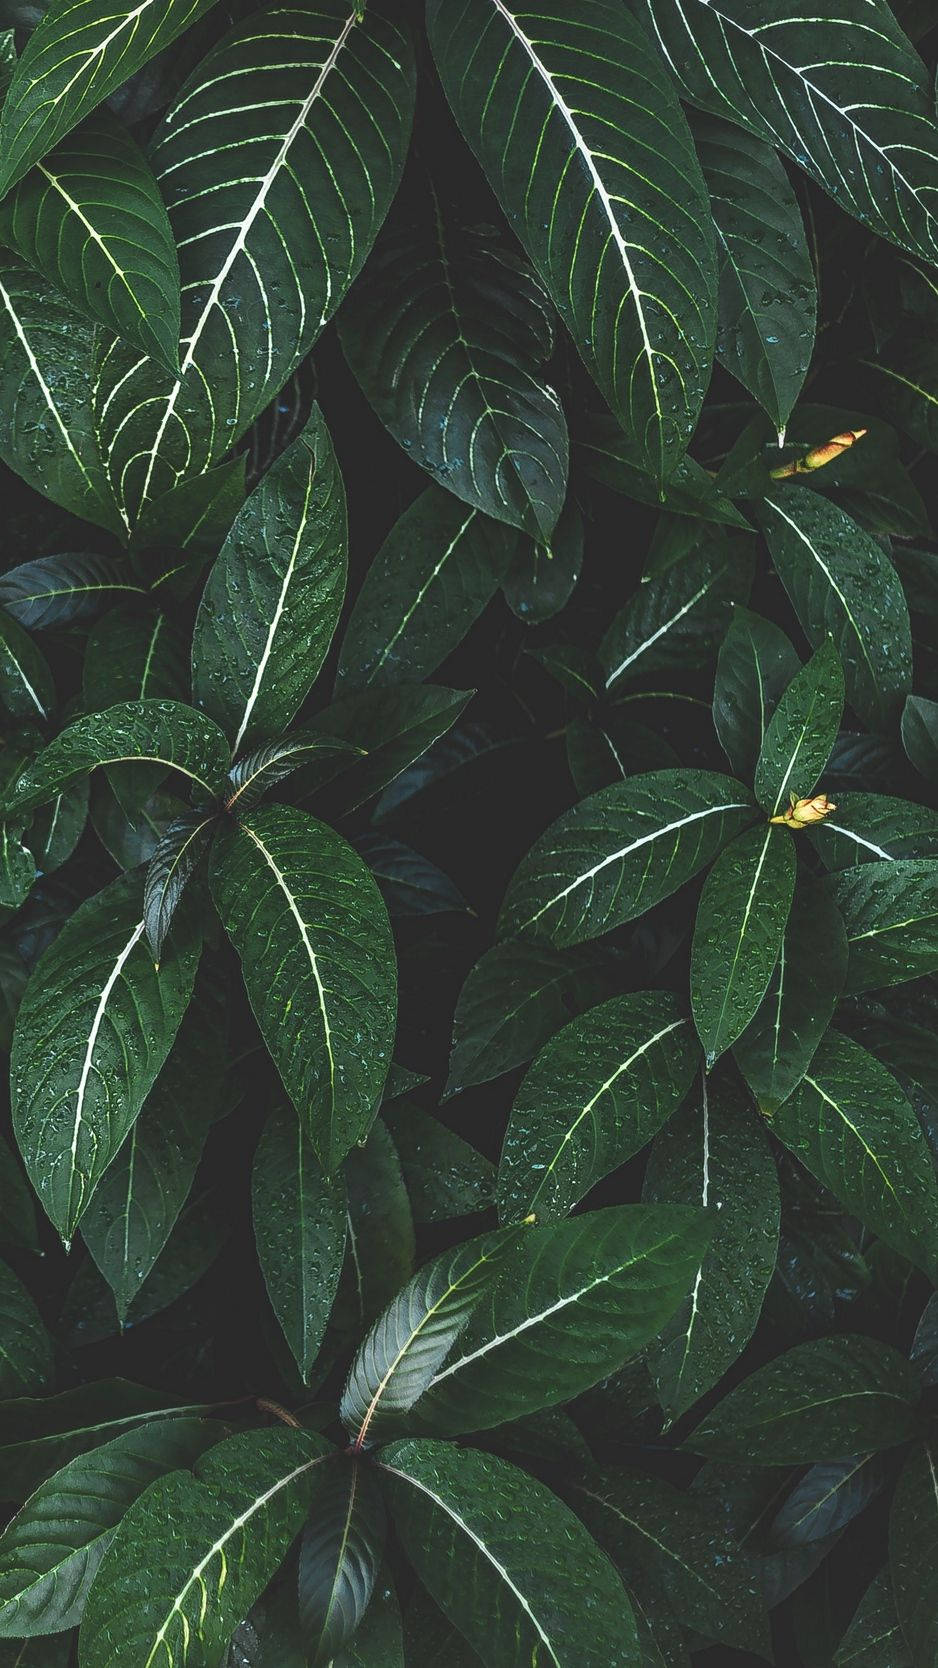 Feel the serenity from nature with the Plants Iphone Wallpaper